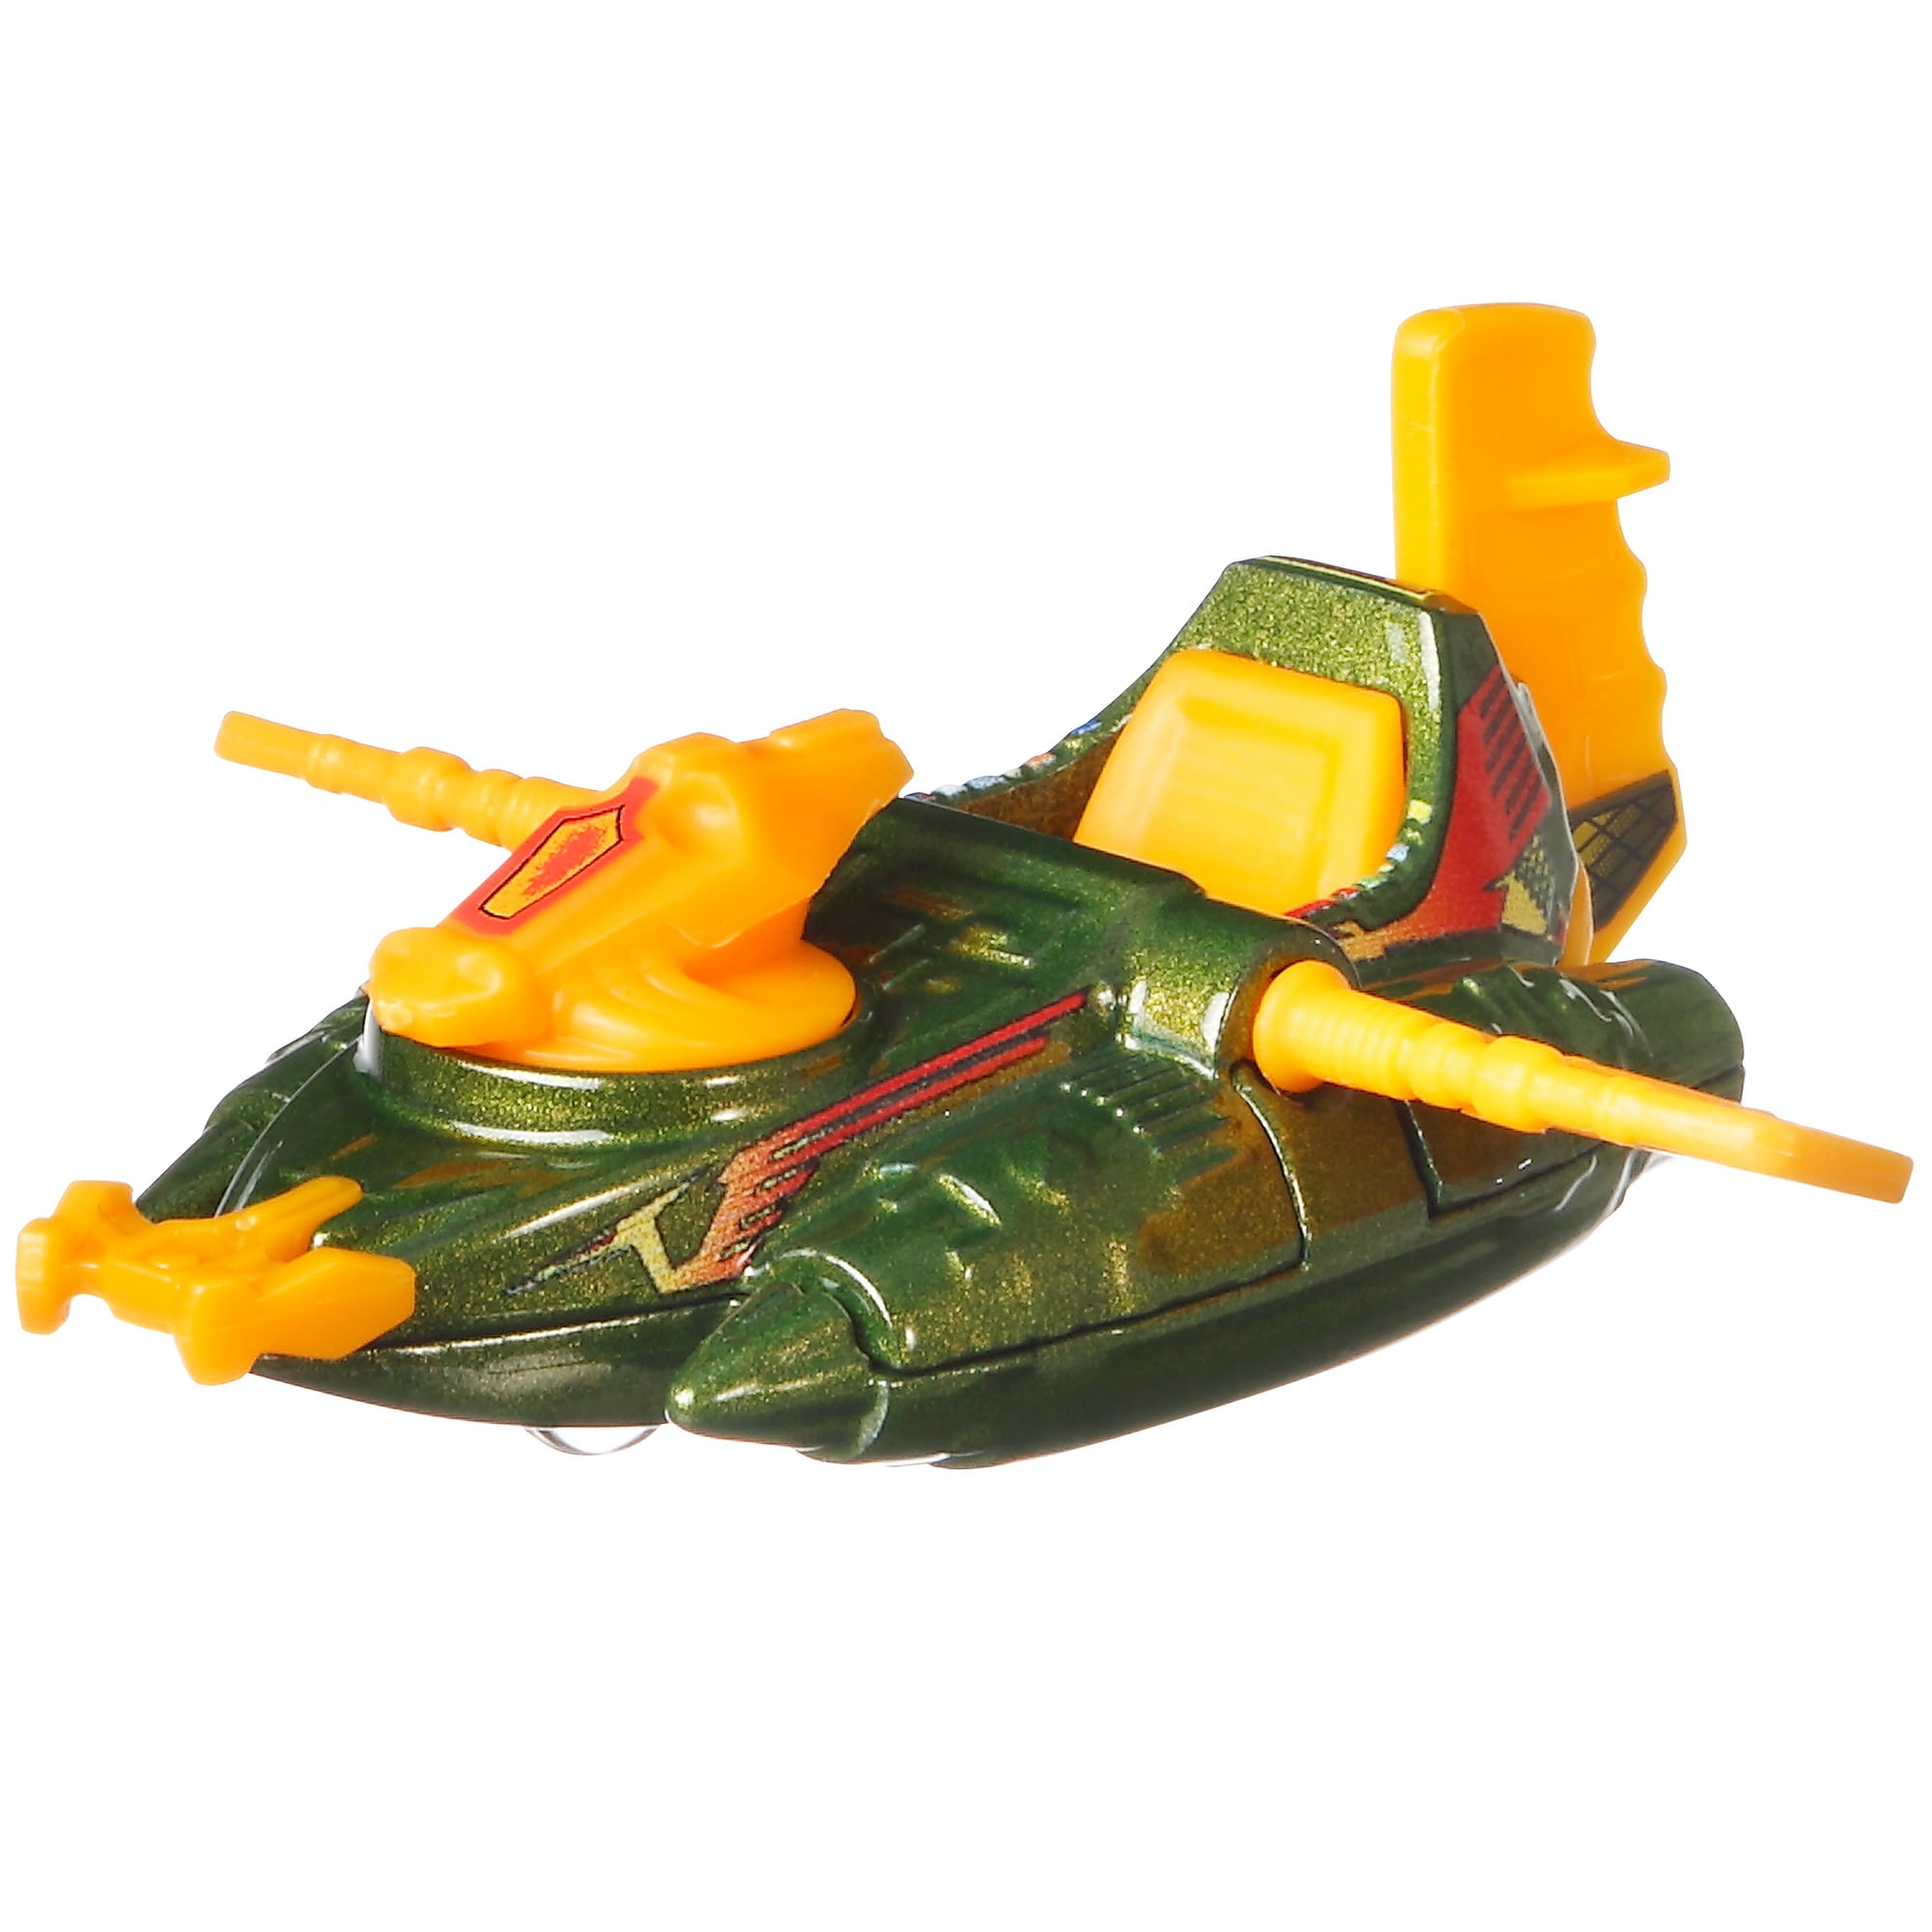 Mattel Masters of The Universe Classics Wind Raider Vehicle for sale online 